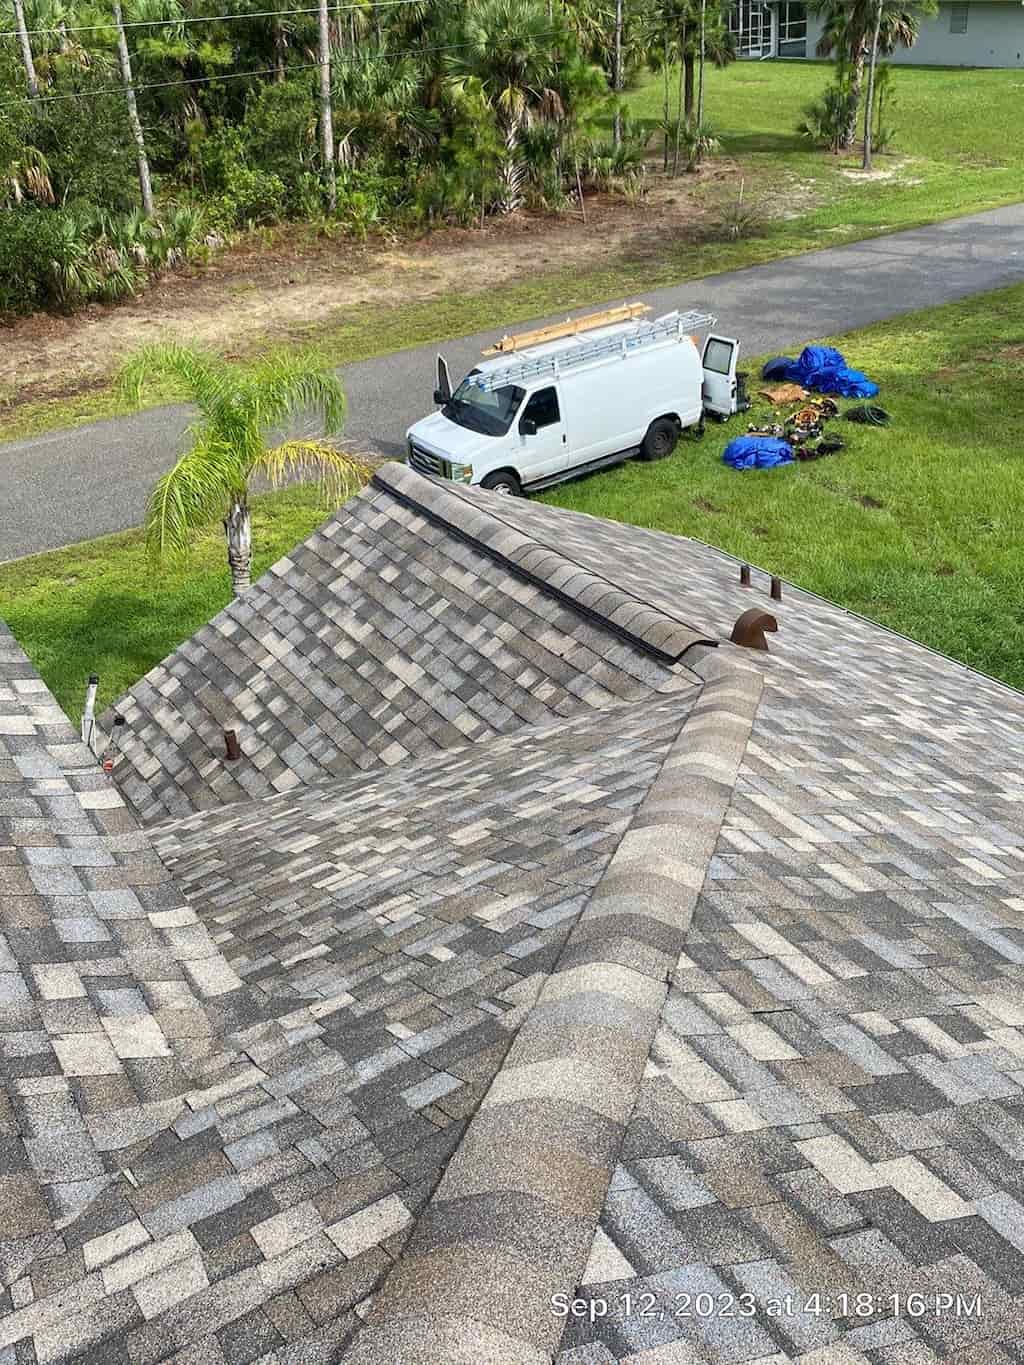 A van is working on a roof in a residential area, performing various tasks.